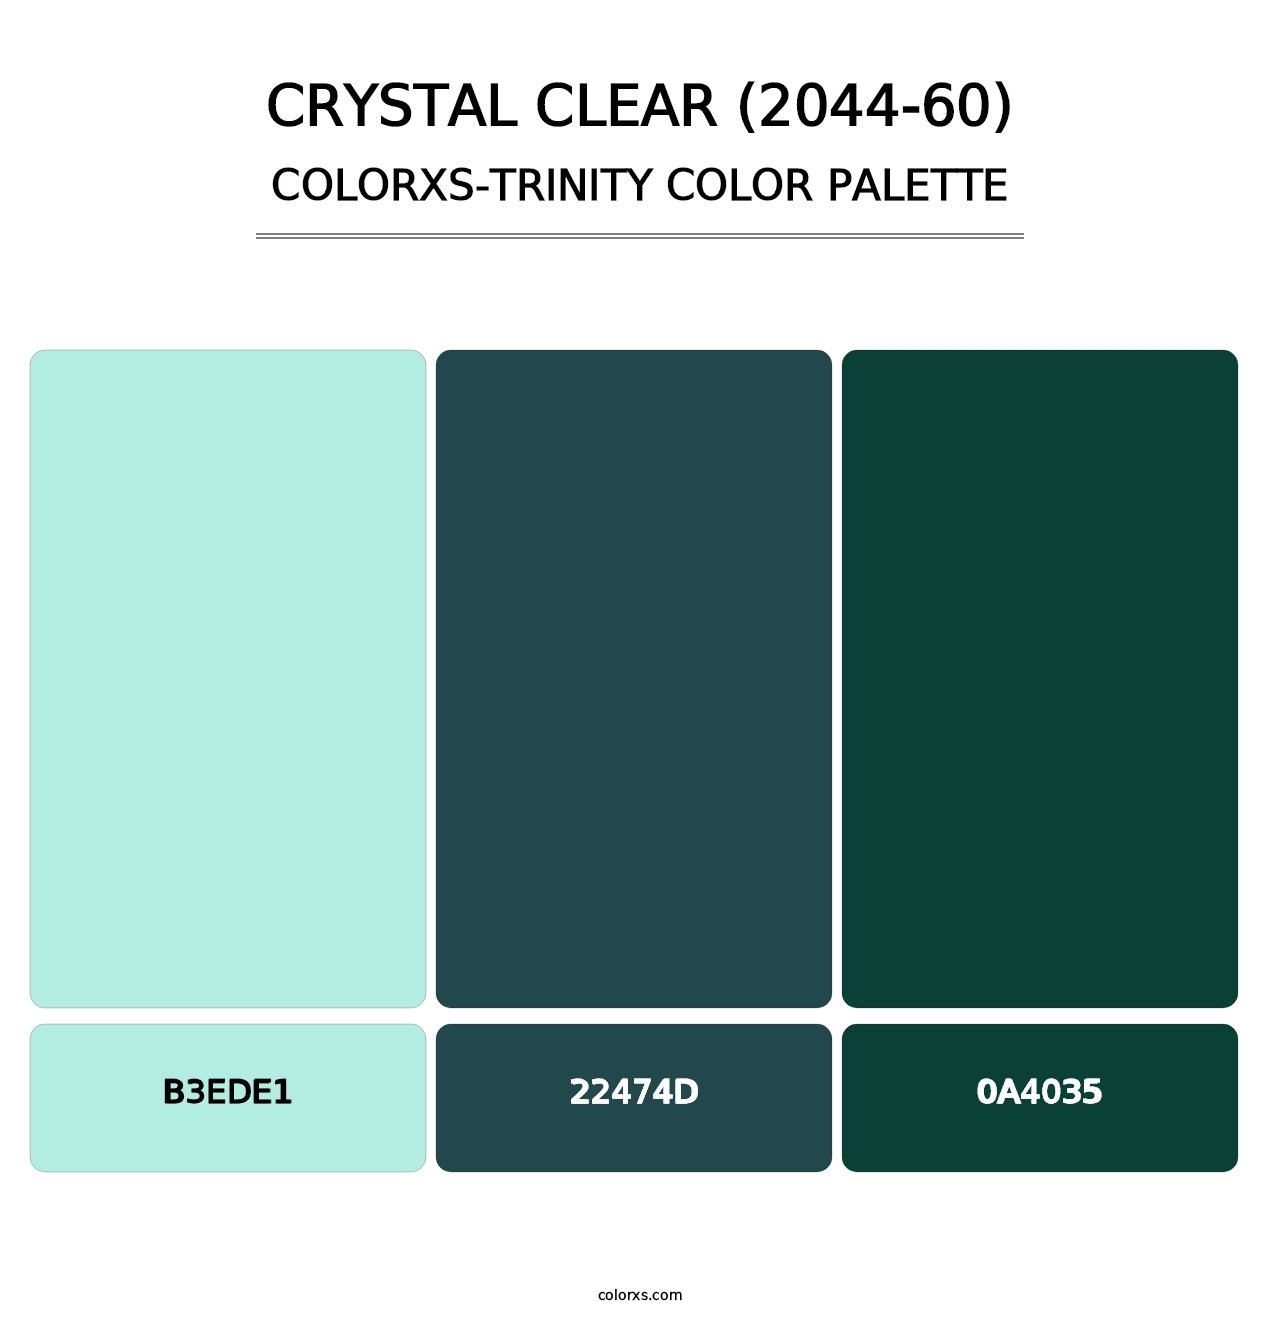 Crystal Clear (2044-60) - Colorxs Trinity Palette